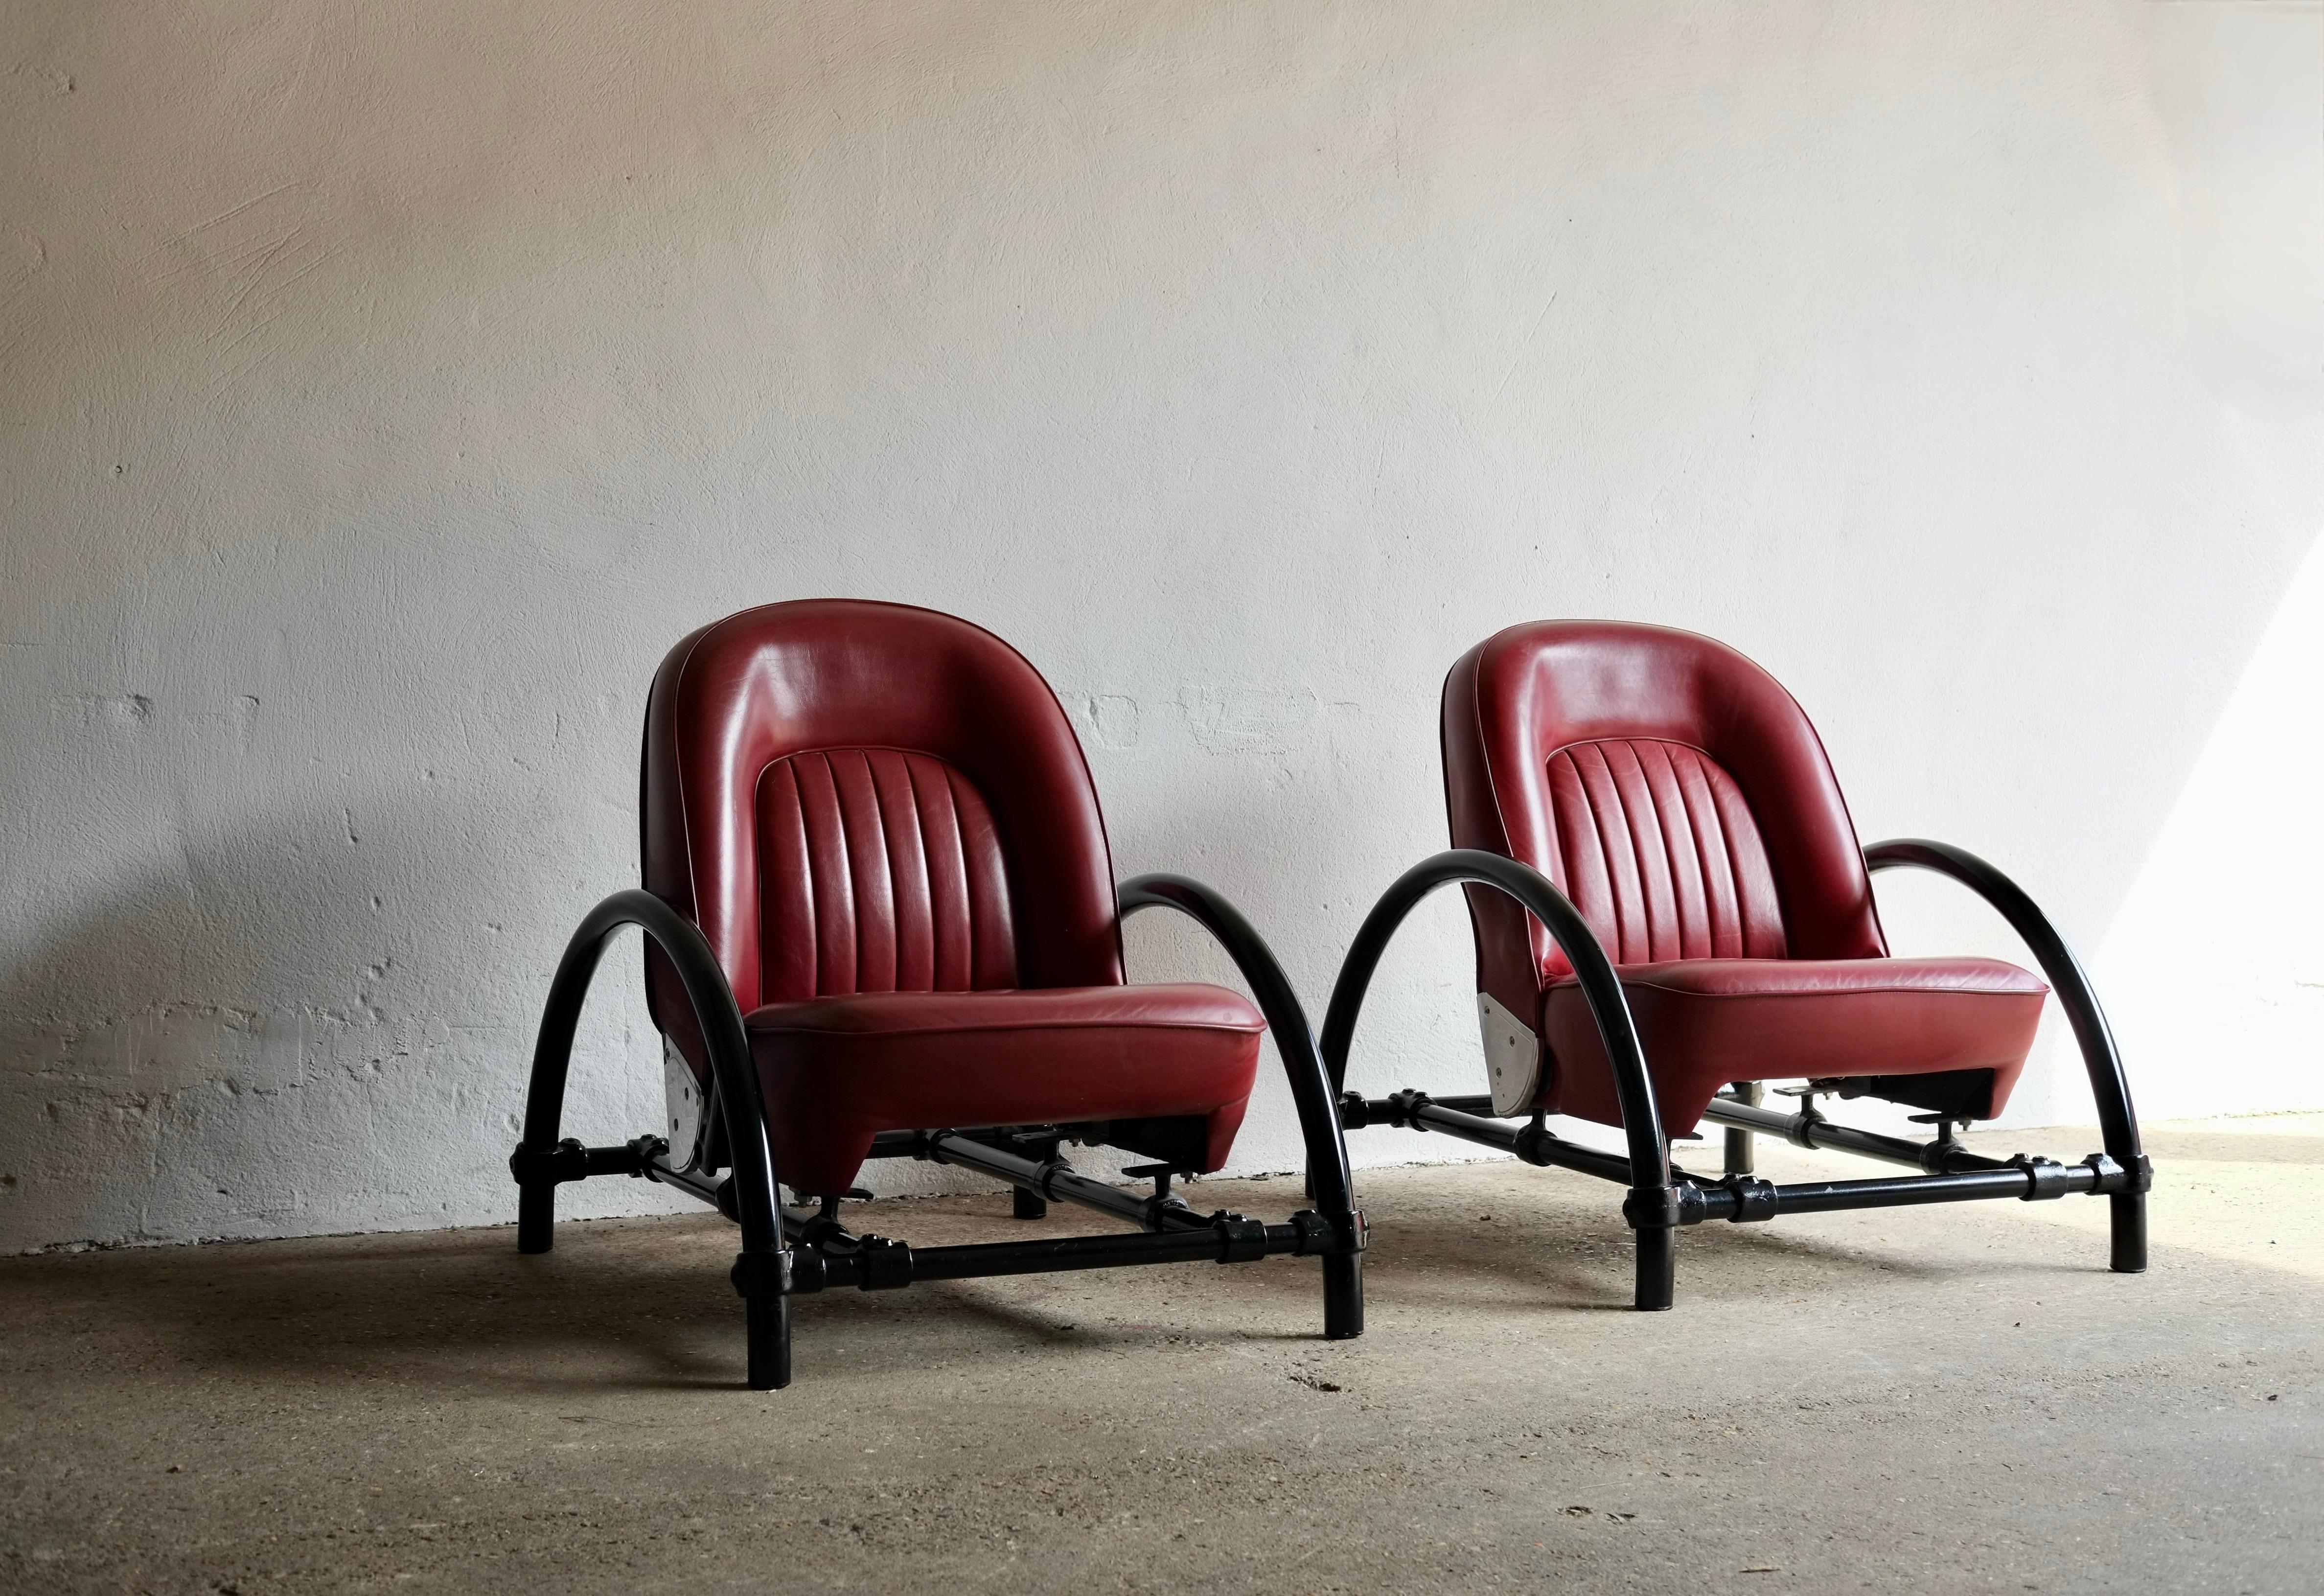 A pair of Rover P6 chairs designed by Ron Arad and produced in the 1980's.

Adjustable leather seats from a Rover P6 supported by a black painted curved steel frame made from a kee klamp milking stool.

Price is for the pair.